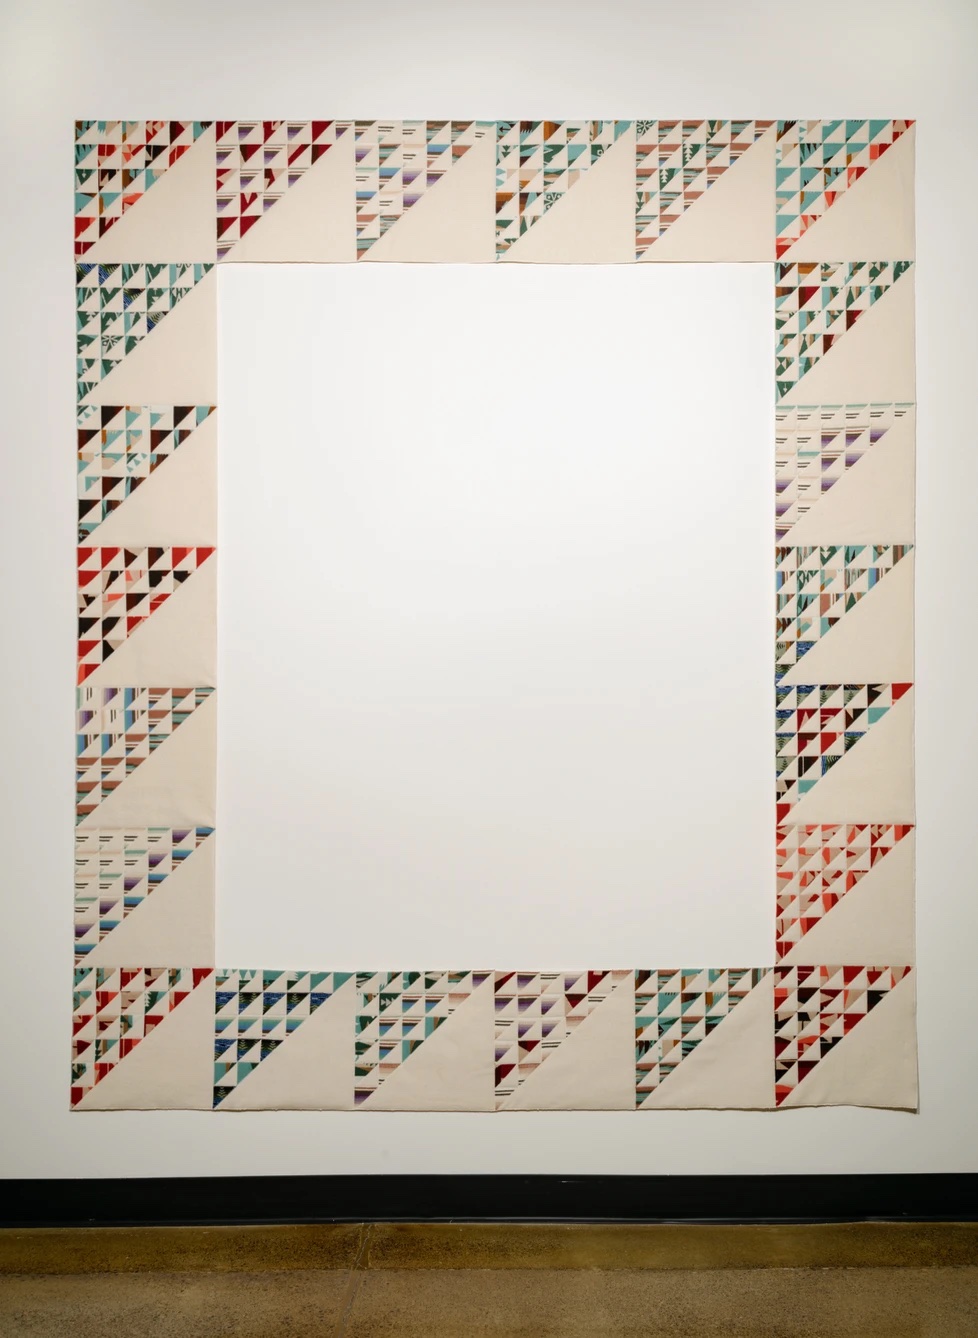 the pieced border of a quilt with an empty interior, against a white wall